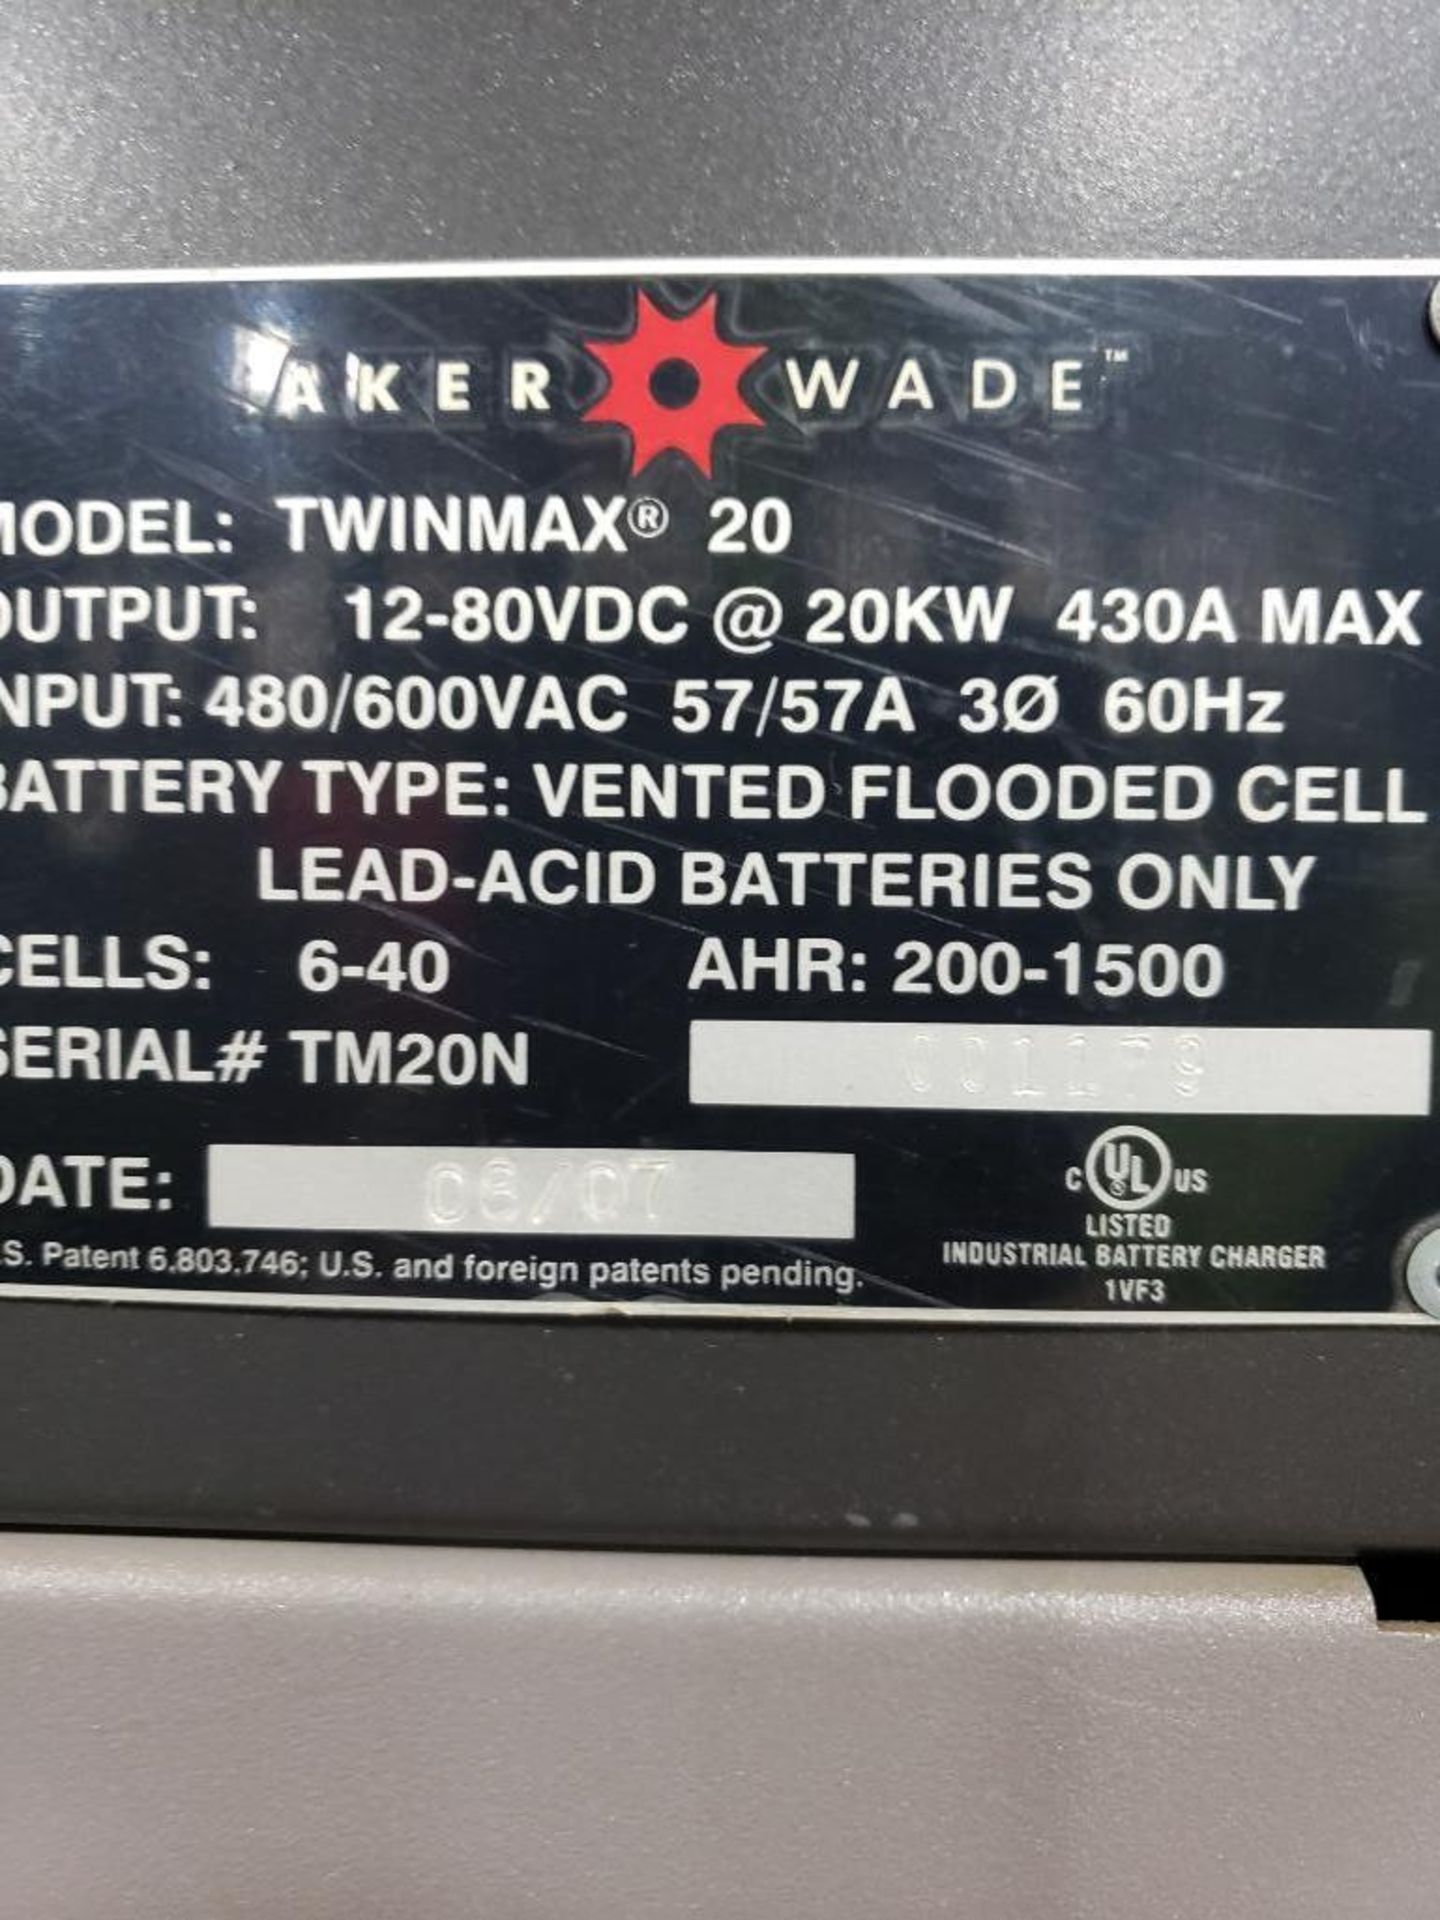 Aker Wade model Twinmax 20 dual battery charger. 12-80VDC. 6-40 cell. 200-1500 A/H. Input 480-600v. - Image 3 of 5